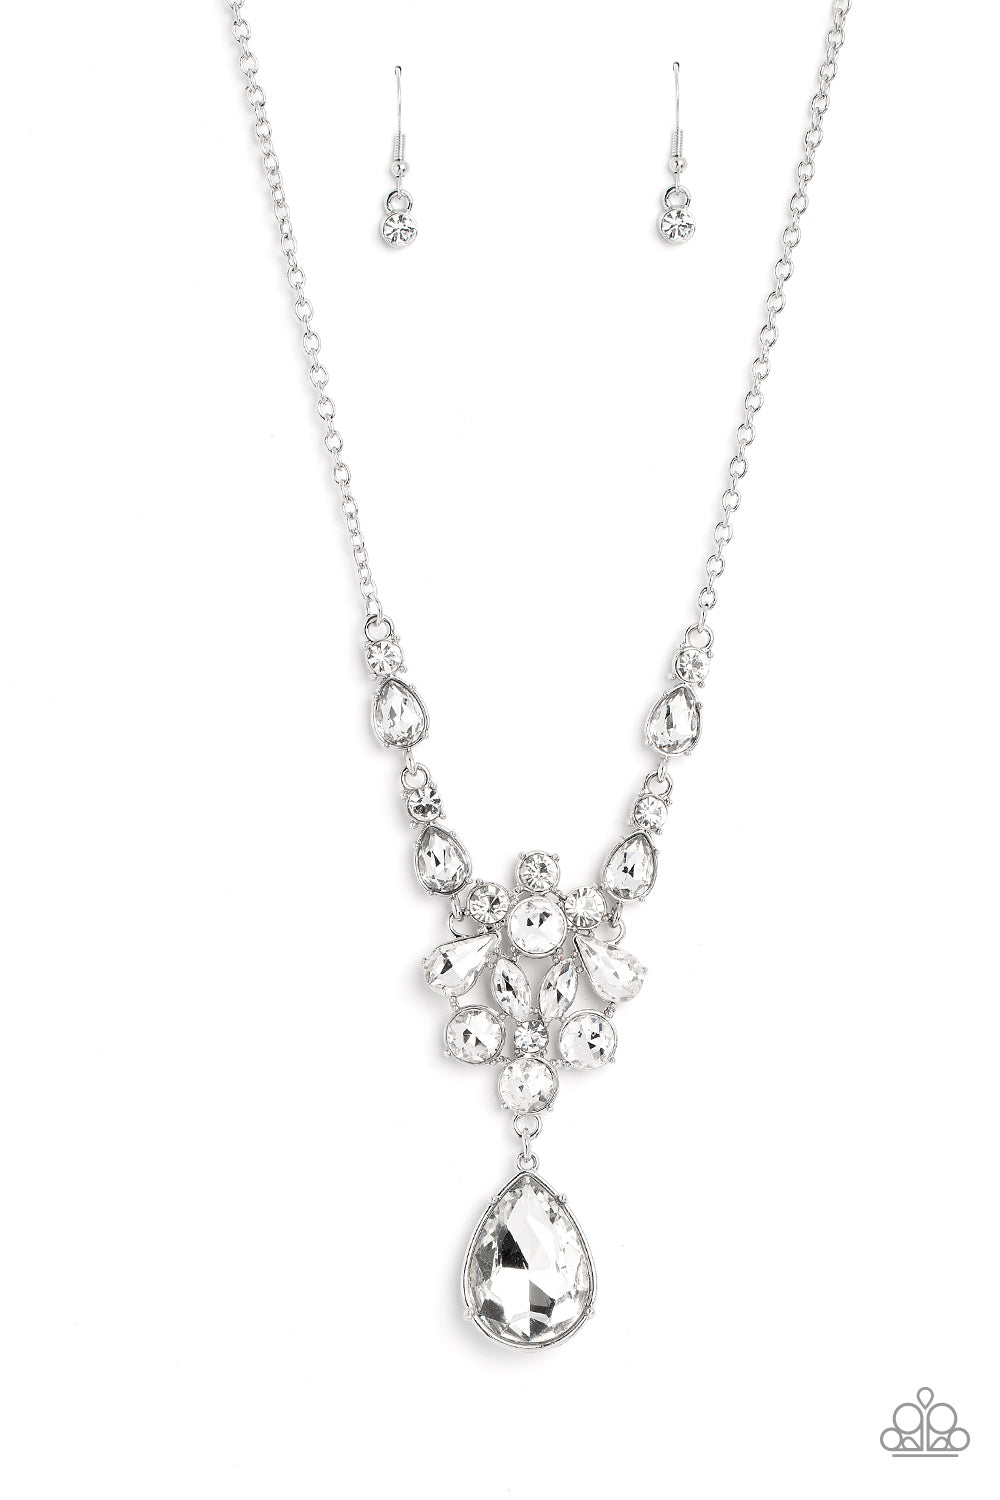 TWINKLE of an Eye - White Paparazzi Necklace